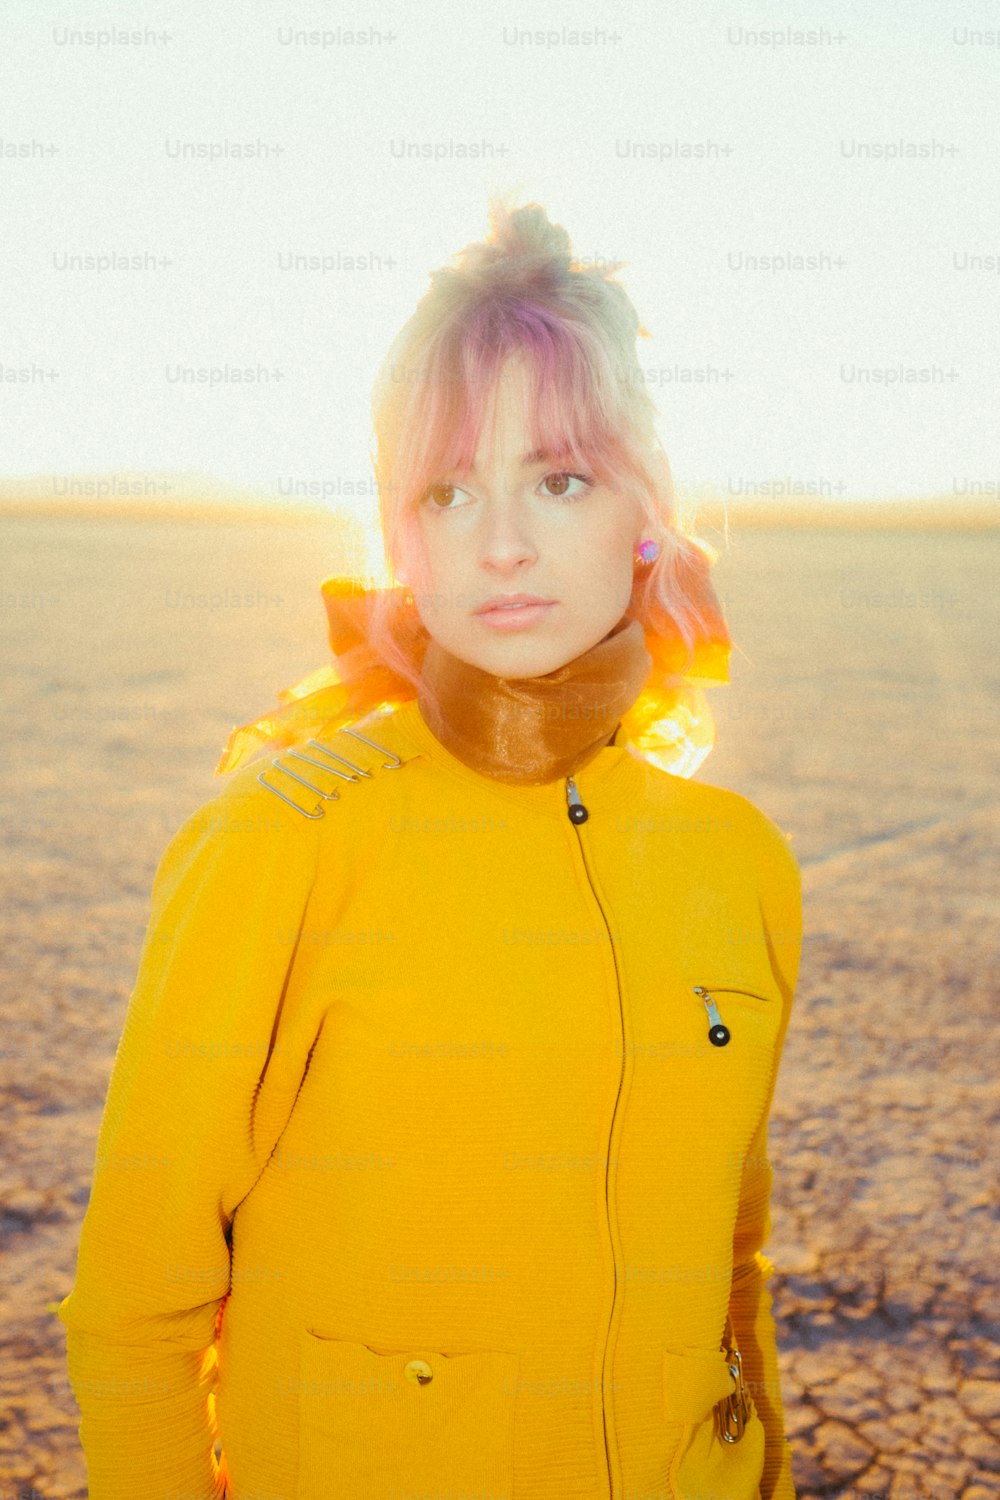 a woman in a yellow jacket standing in the desert